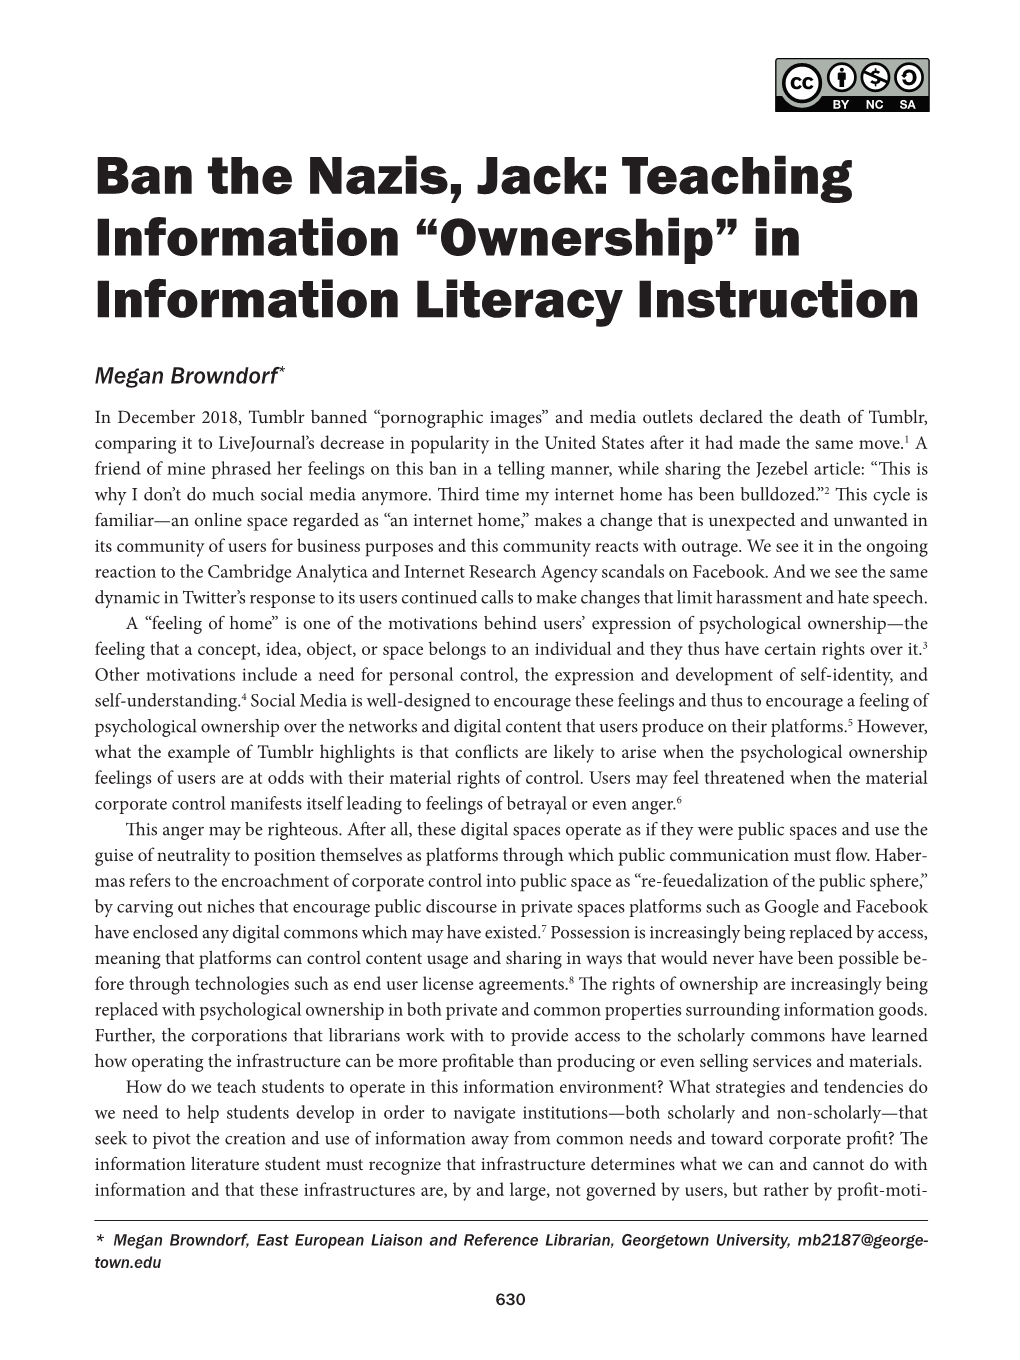 “Ownership” in Information Literacy Instruction